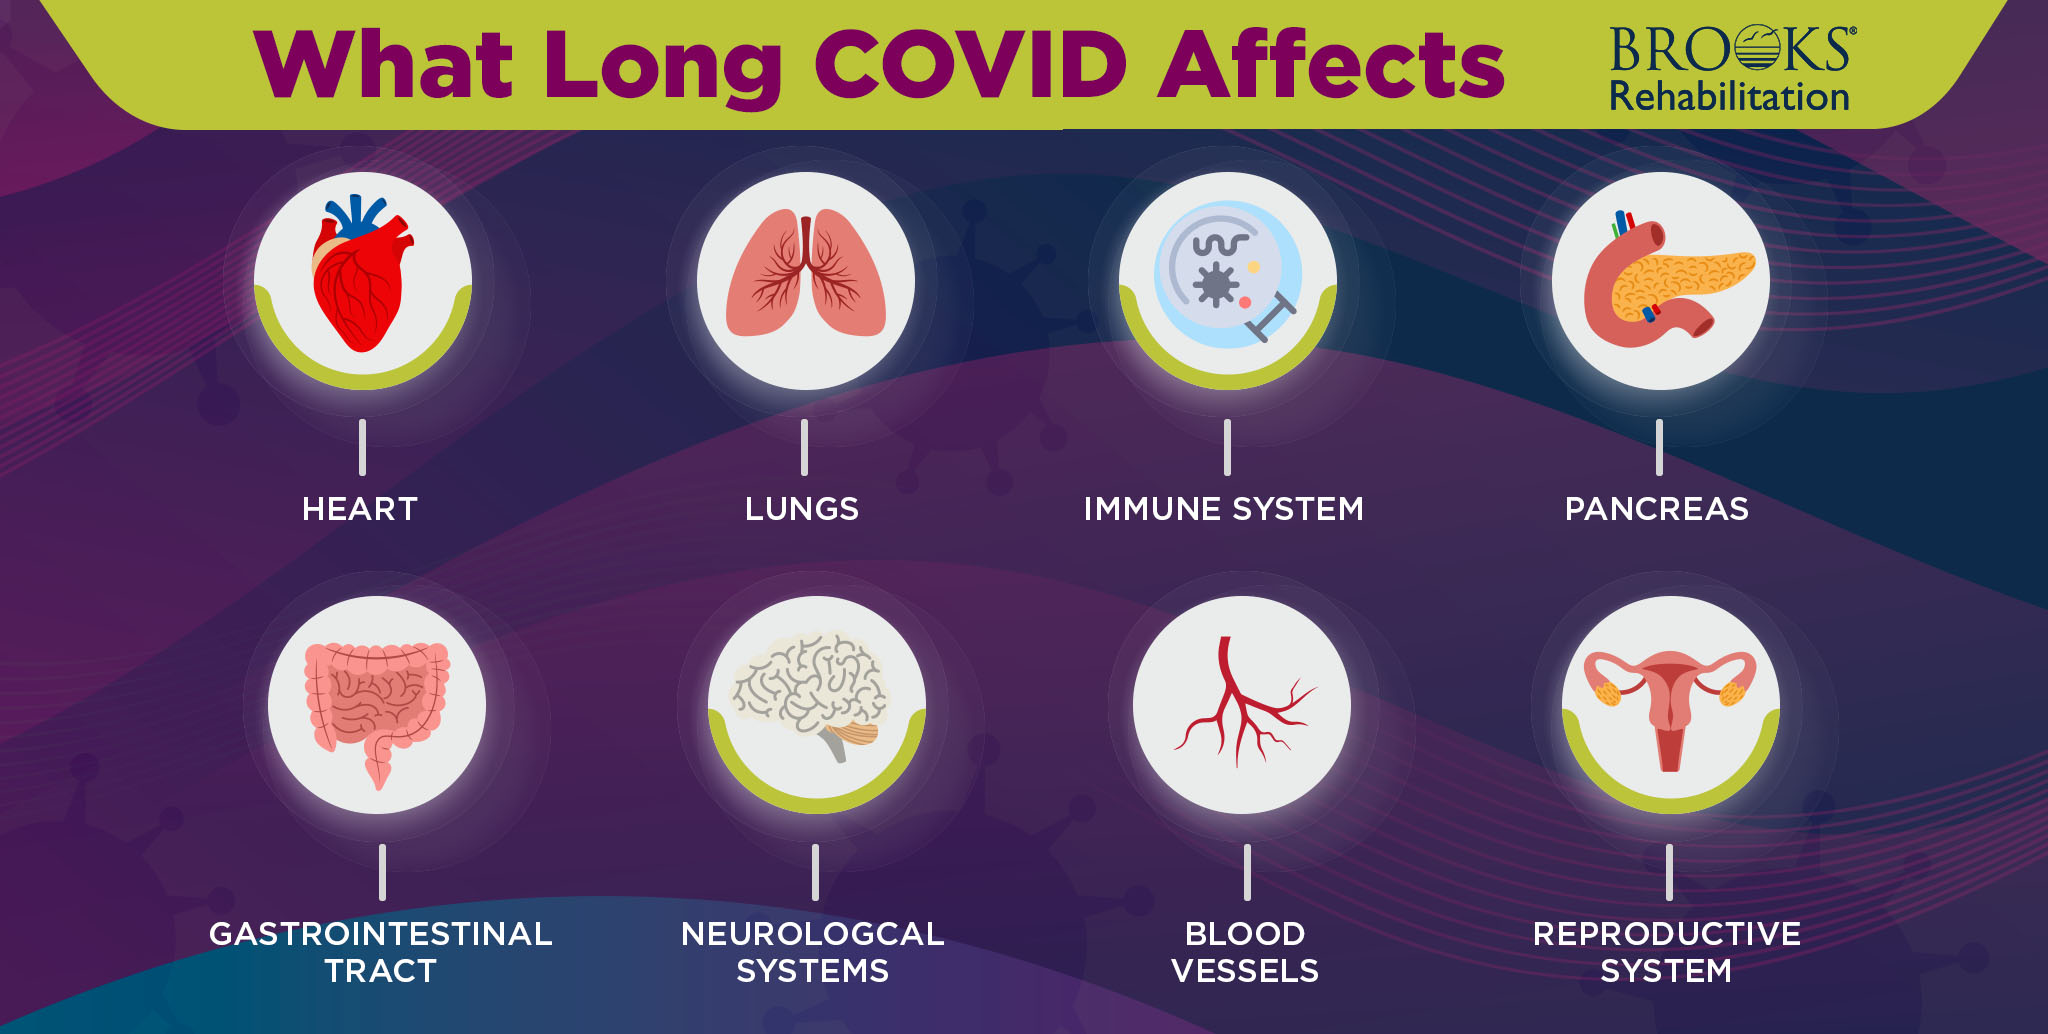 A visual list of all the body systems long COVID affects to include heart, lungs, immune system, gastrointestinal tract and more. 